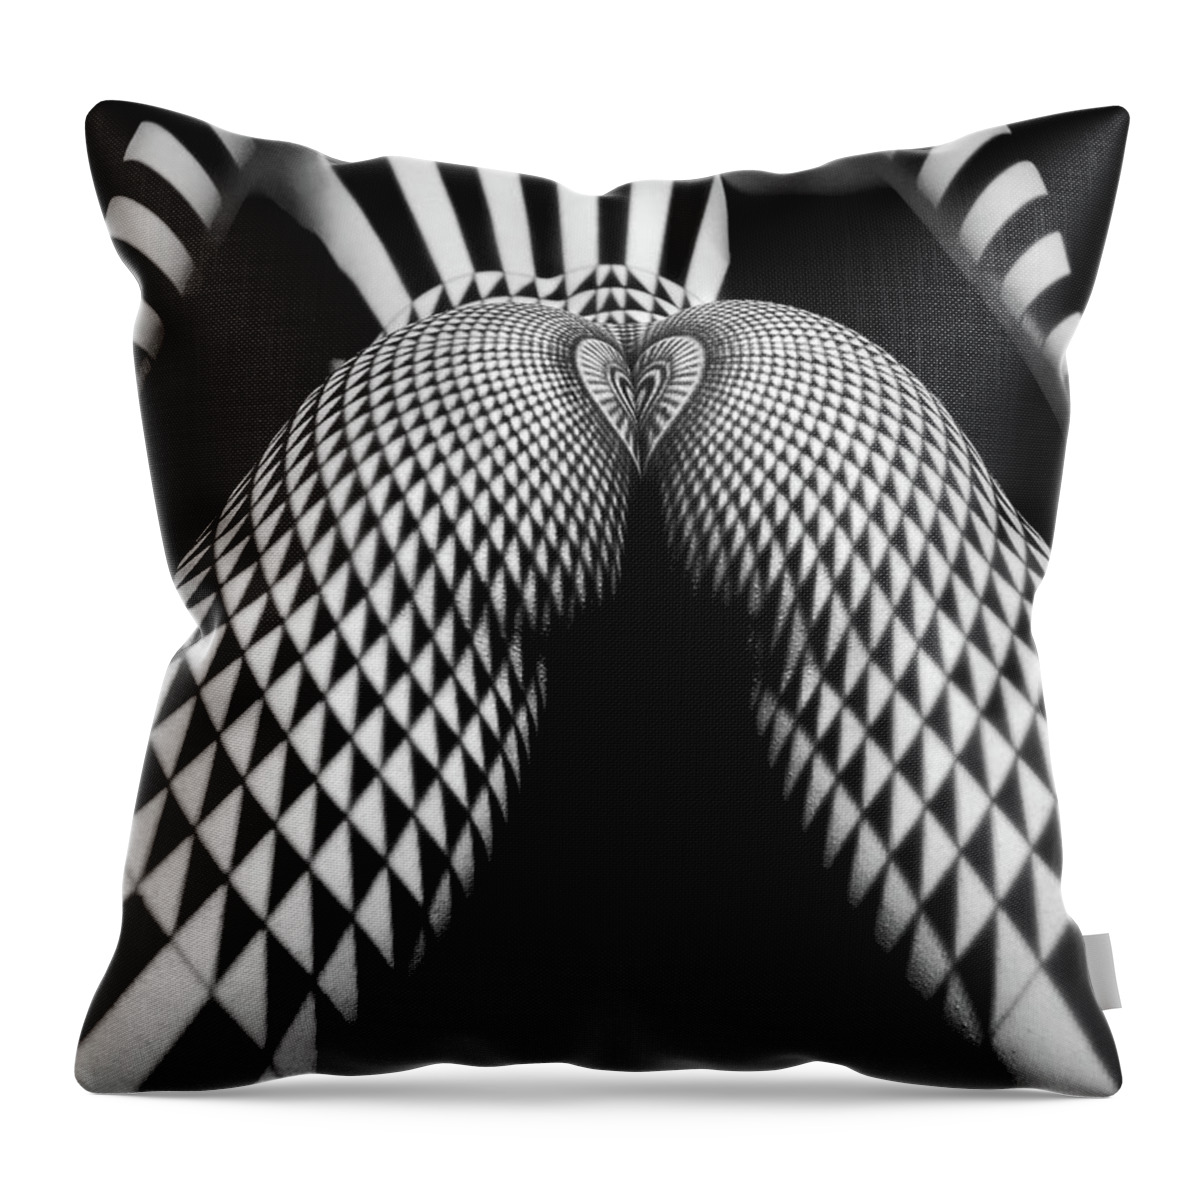  Throw Pillow featuring the digital art Heart Left Behind by Chris Maher